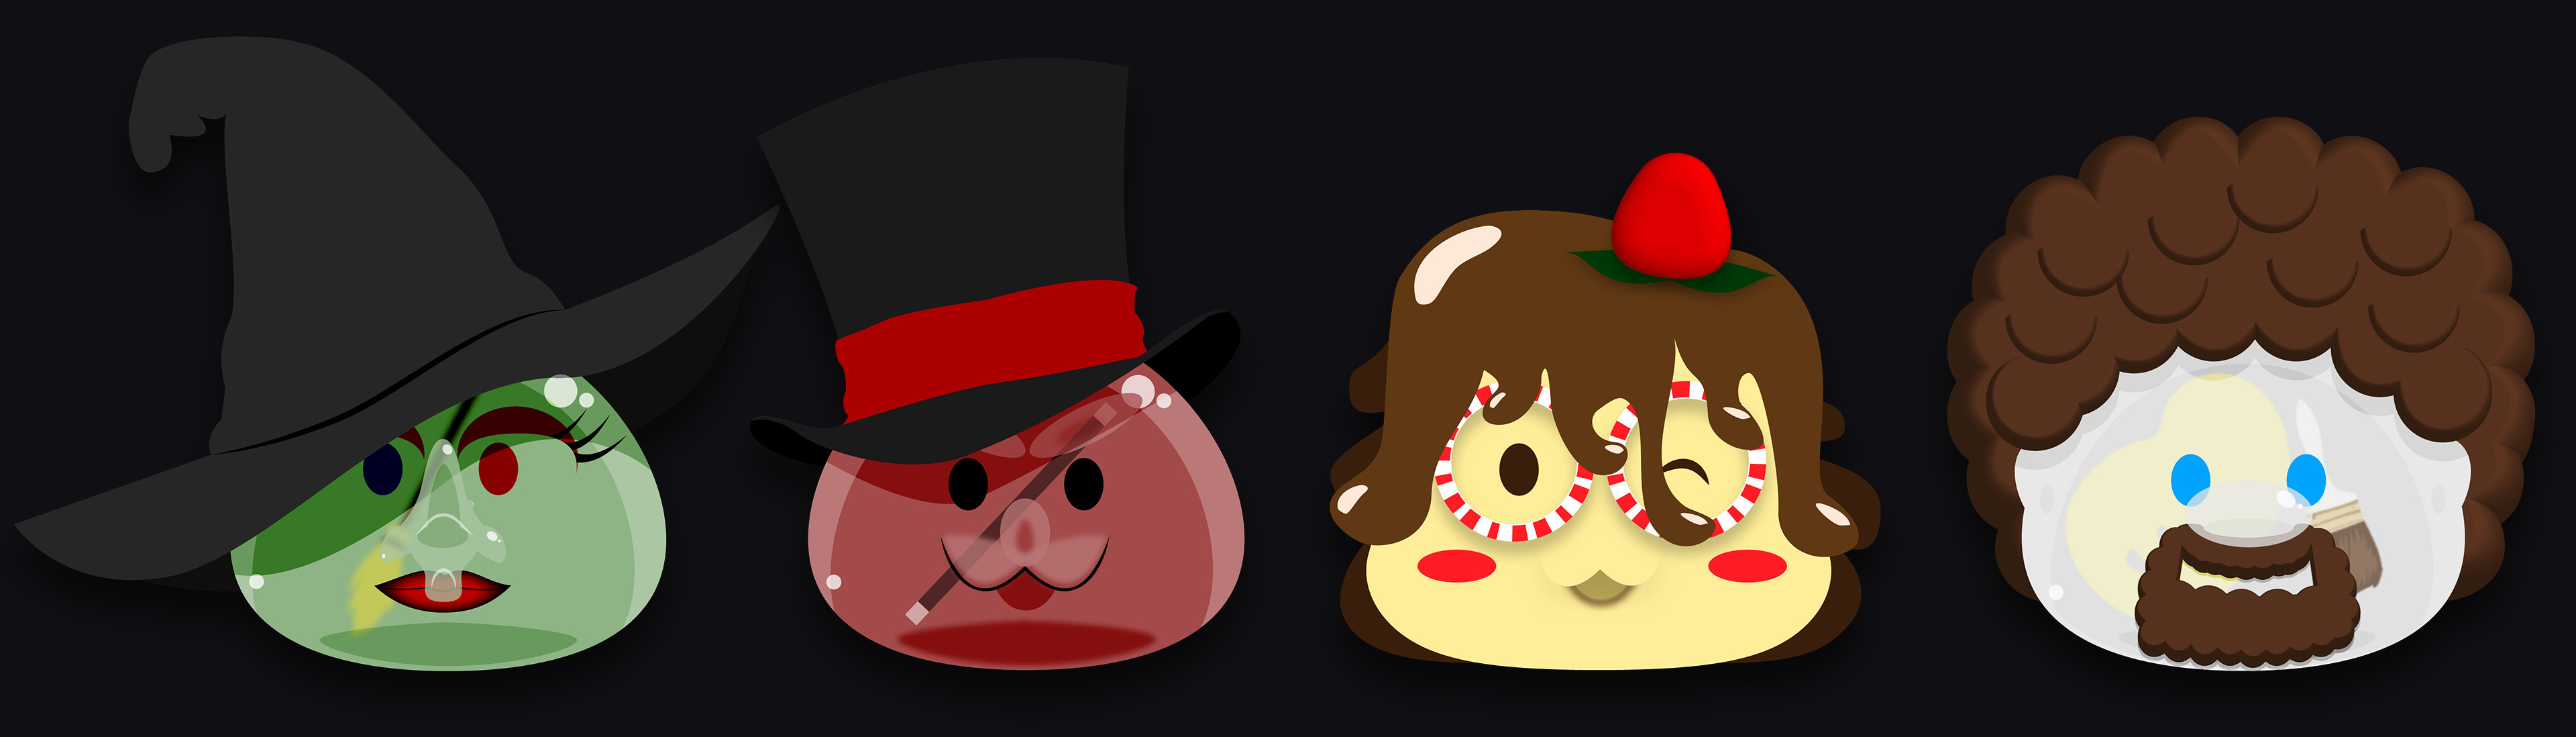 Slime concepts from left to right: Blobba Yagga, Gary Goodini, Flangelica, and Blob Ross